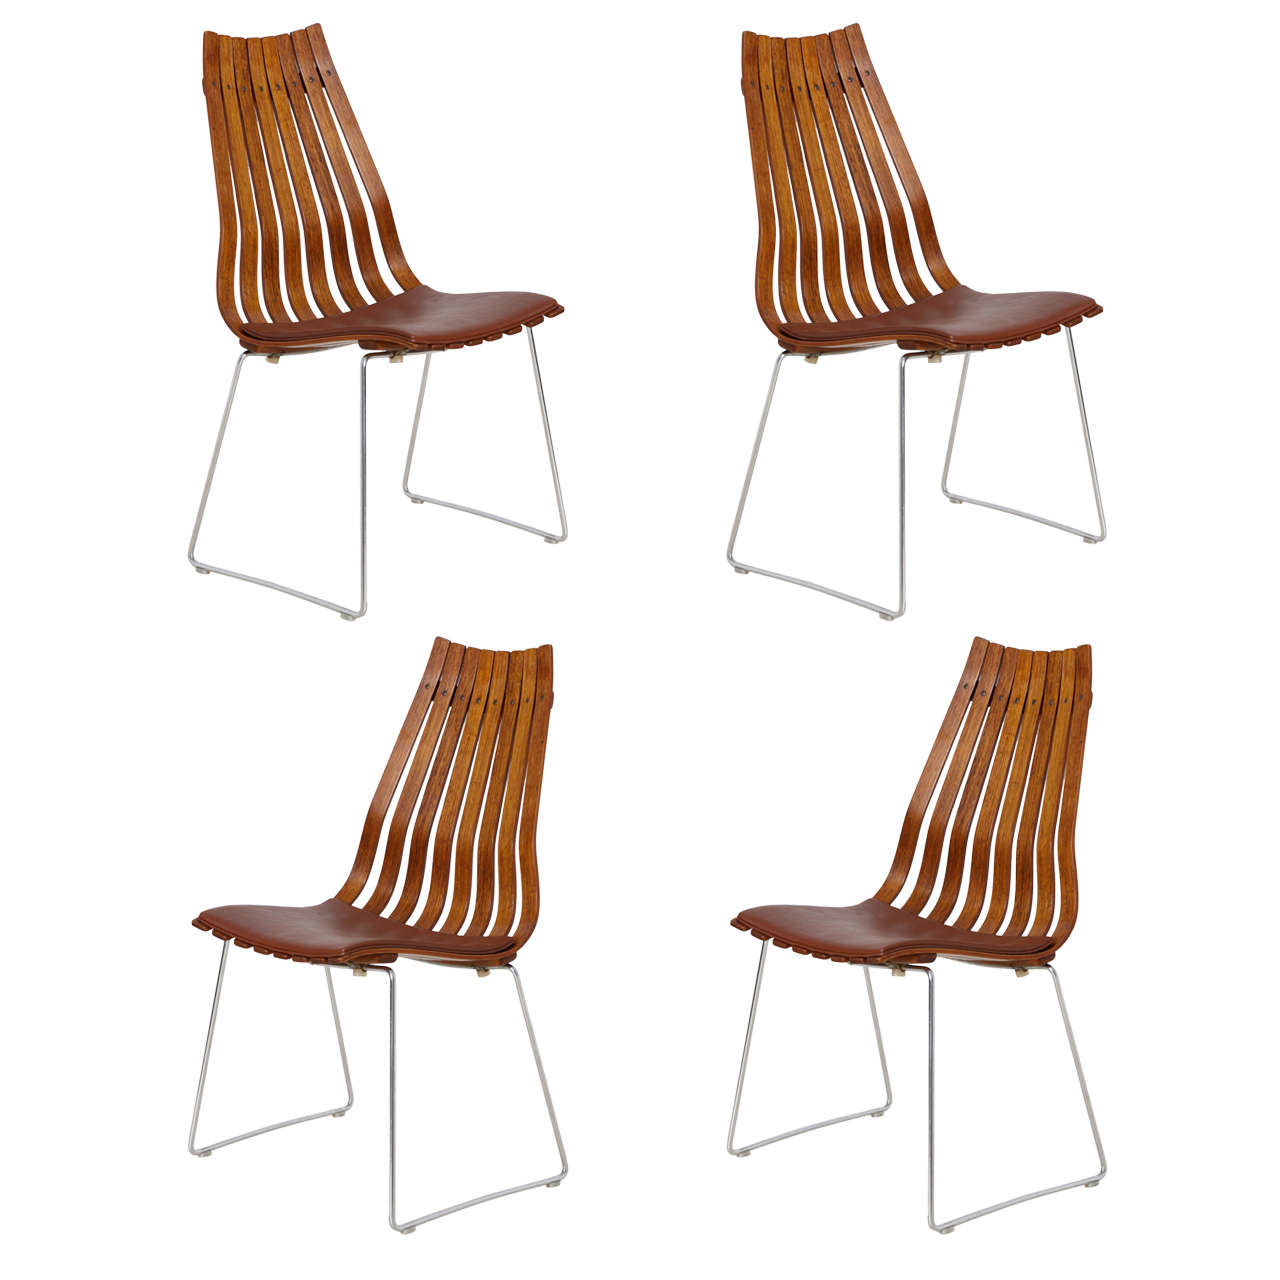 Four Rosewood Hans Brattrud Chairs, 1970 For Sale